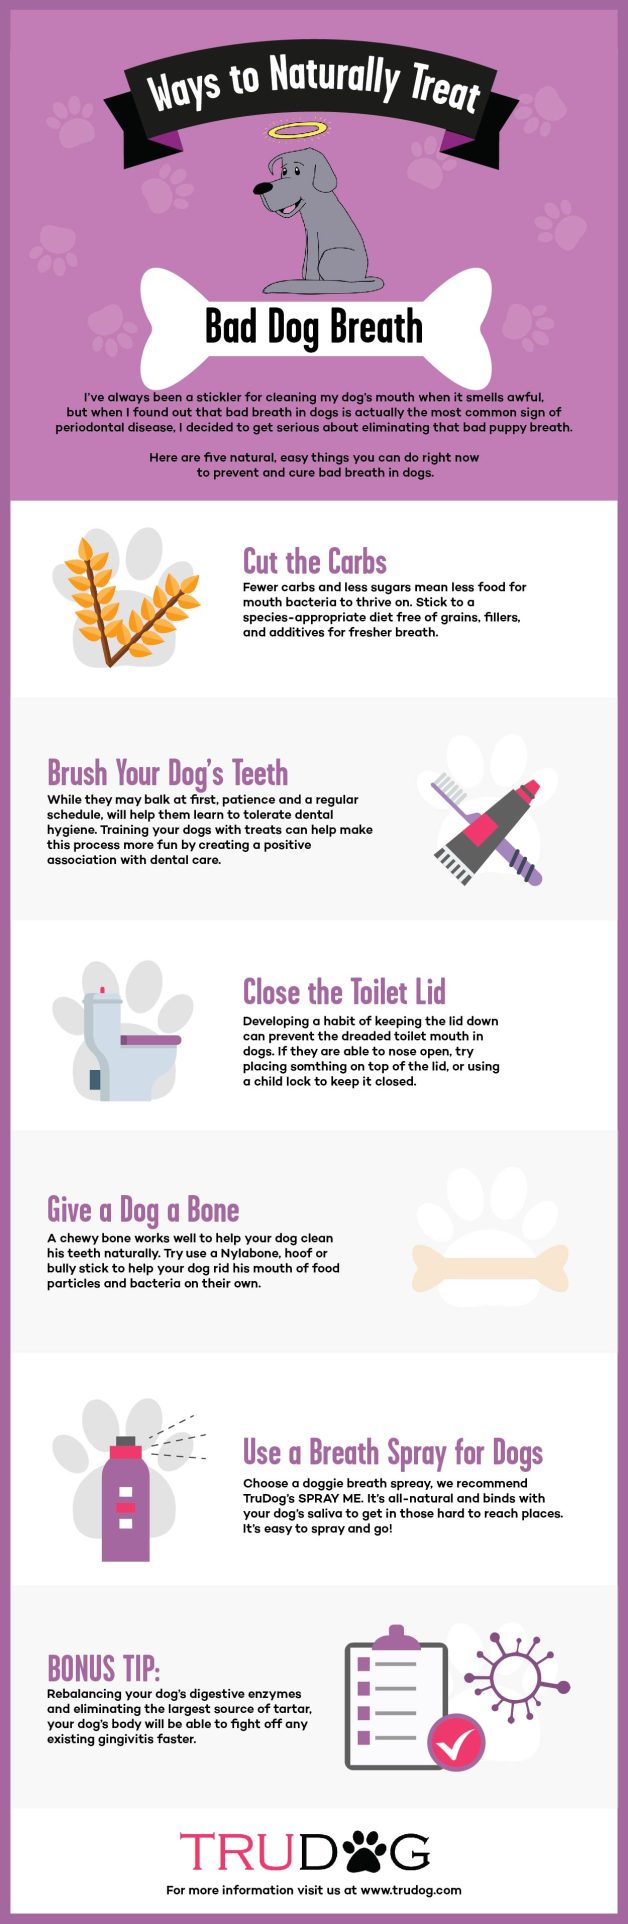 Dog Breath – Why Your Dog’s Bad Breath Stinks and How to Fix It